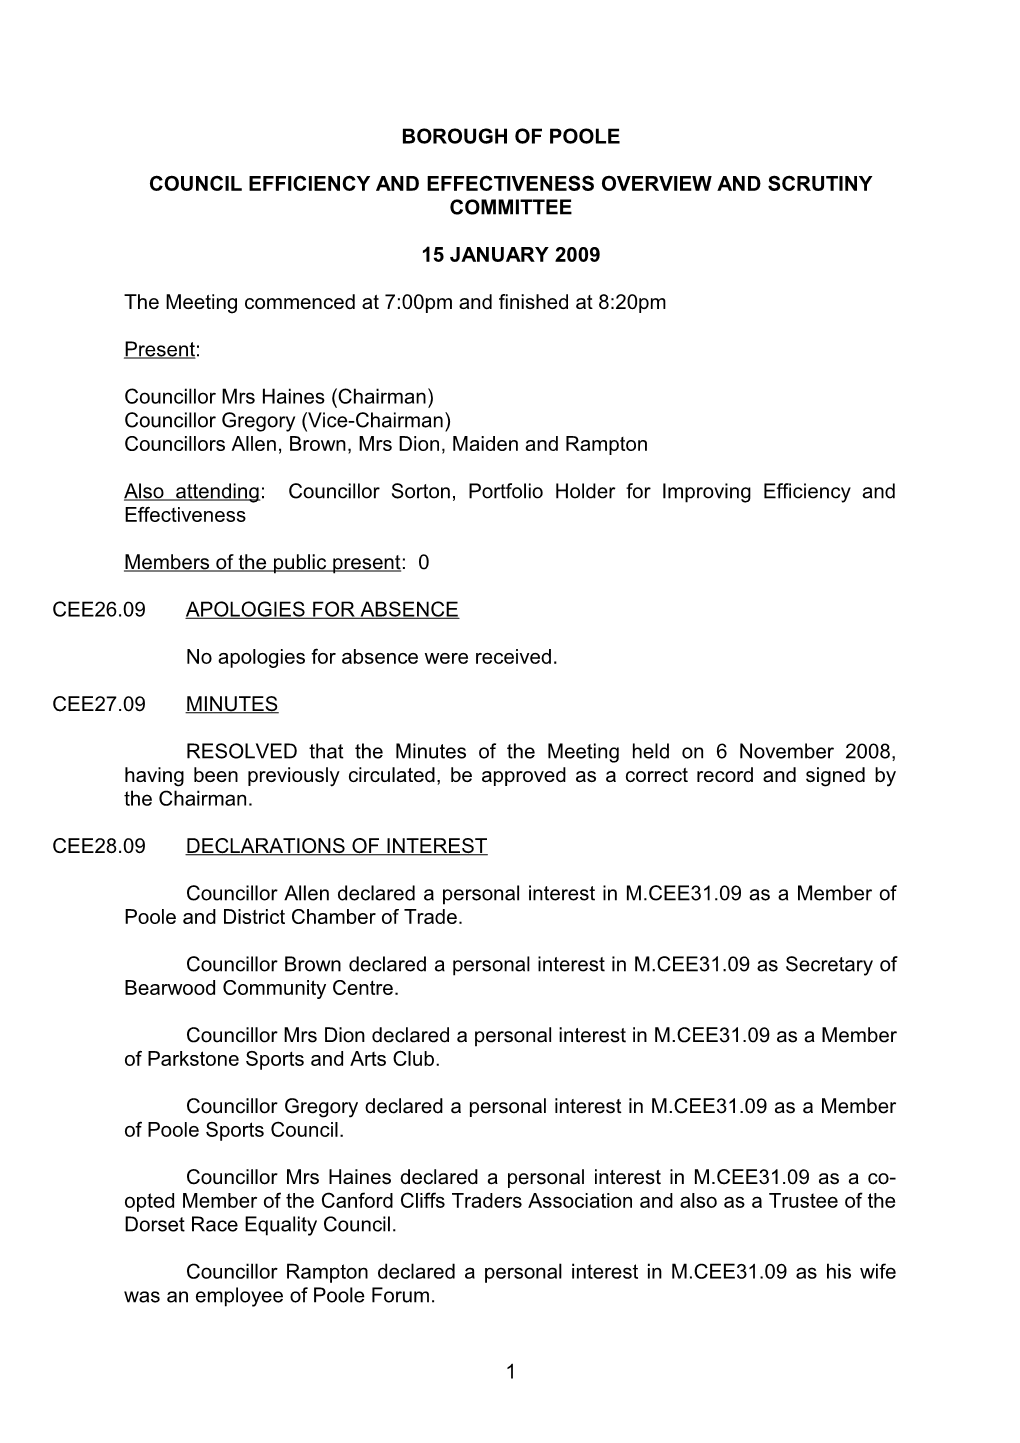 Minutes - Council Efficiency and Effectiveness Overview and Scrutiny Committee - 15 January 2009